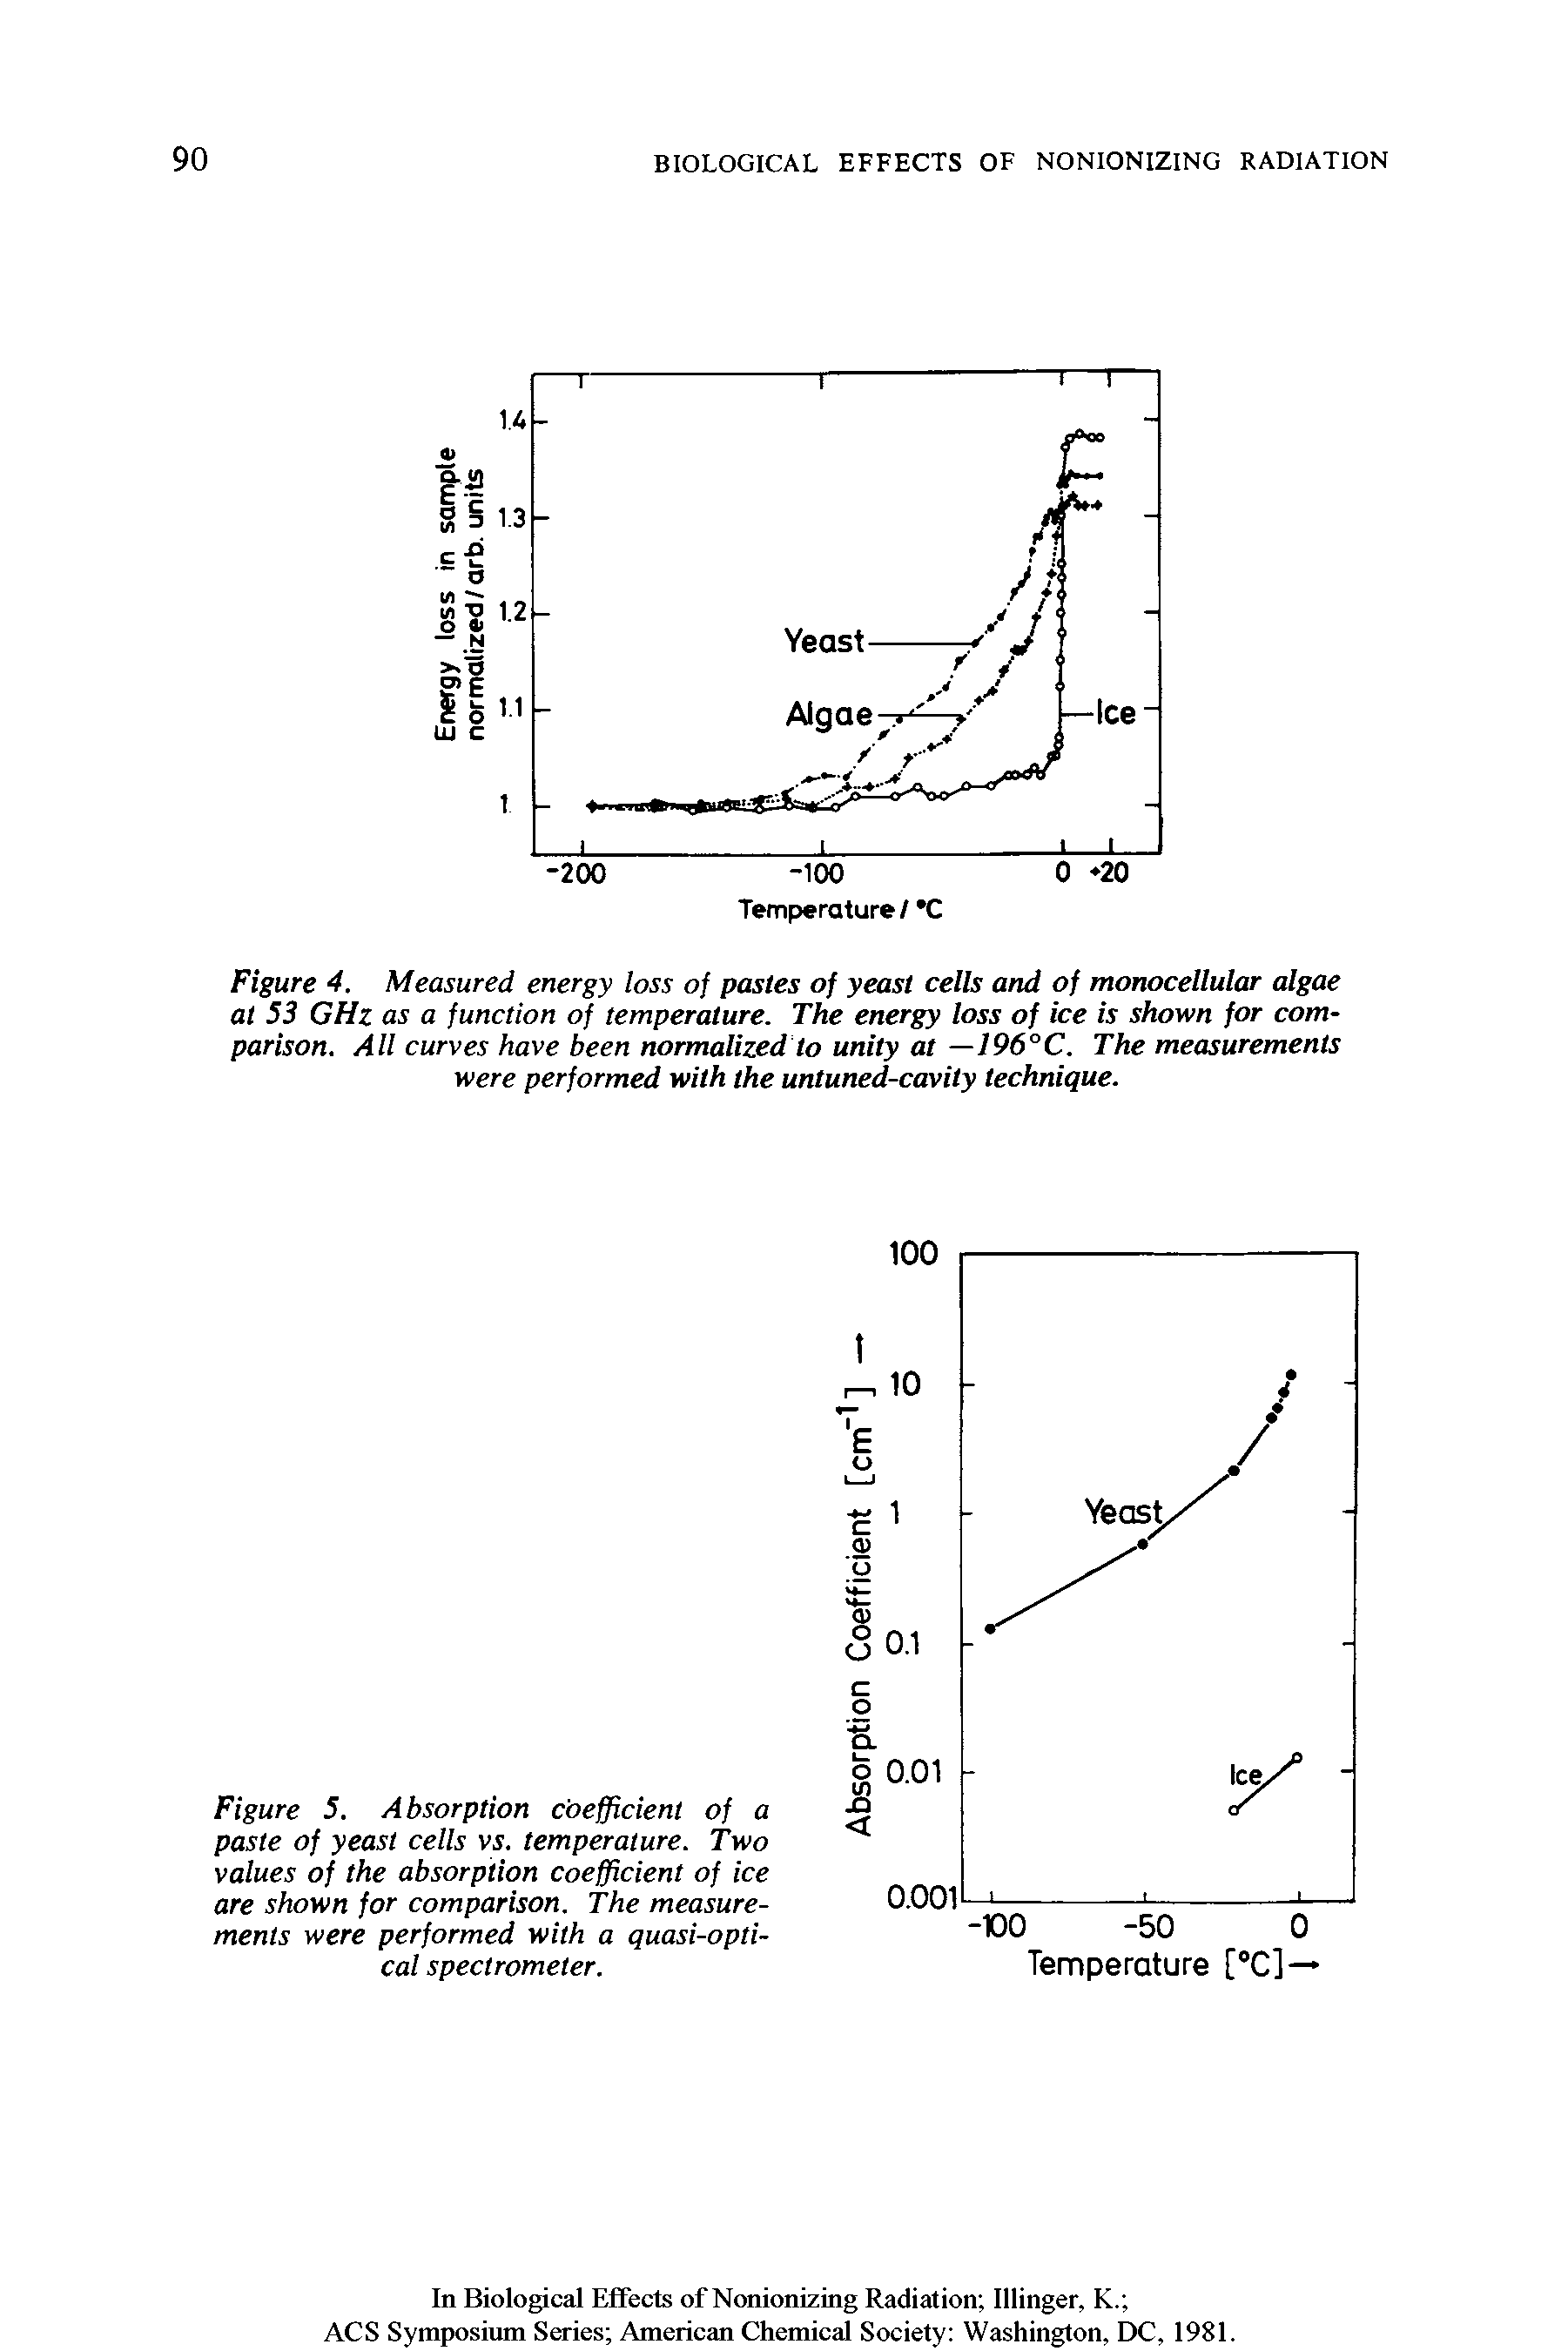 Figure 4. Measured energy loss of pastes of yeast cells and of monocellular algae at 53 GHz as a function of temperature. The energy loss of ice is shown for comparison. All curves have been normalized to unity at —196°C. The measurements were performed with the untuned-cavity technique.